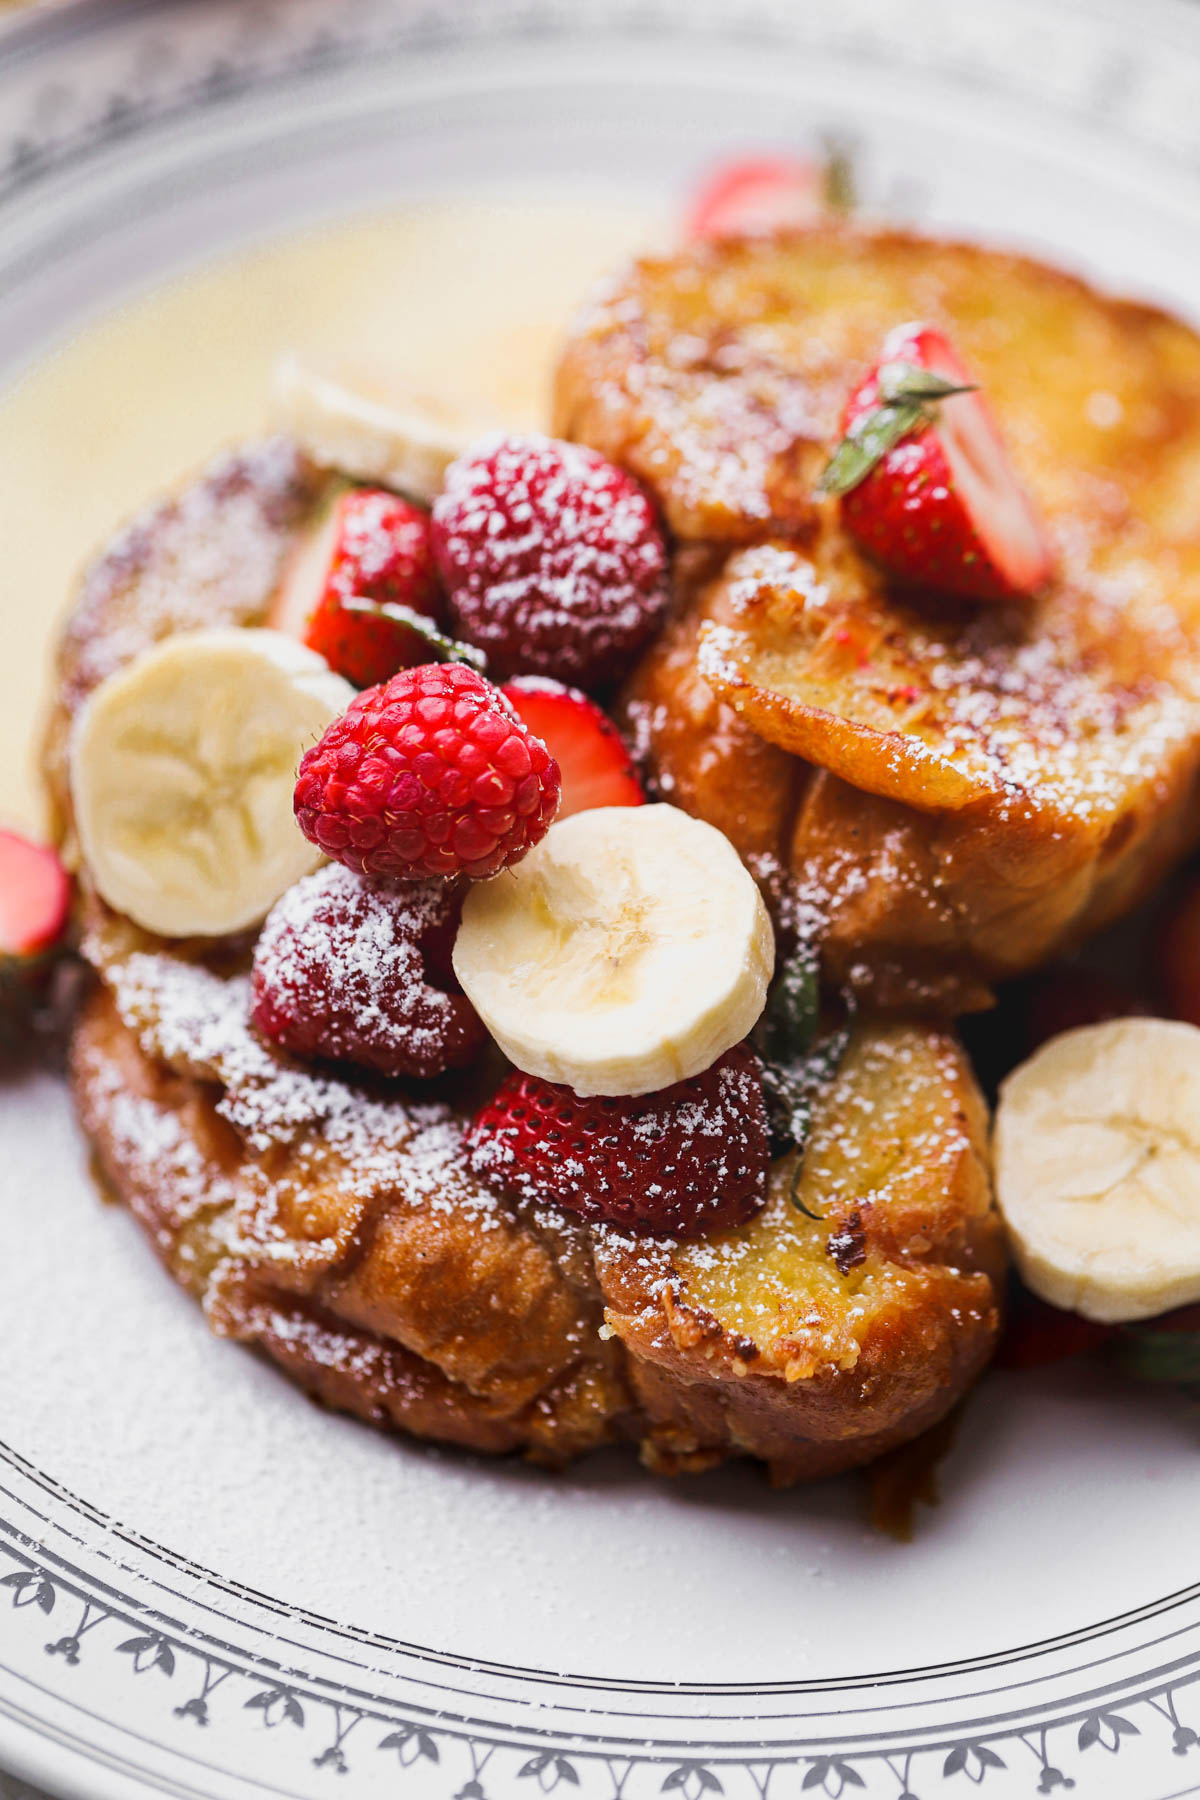 Custard French Toast cooked inside butter and topped with fresh berries and sliced bananas.